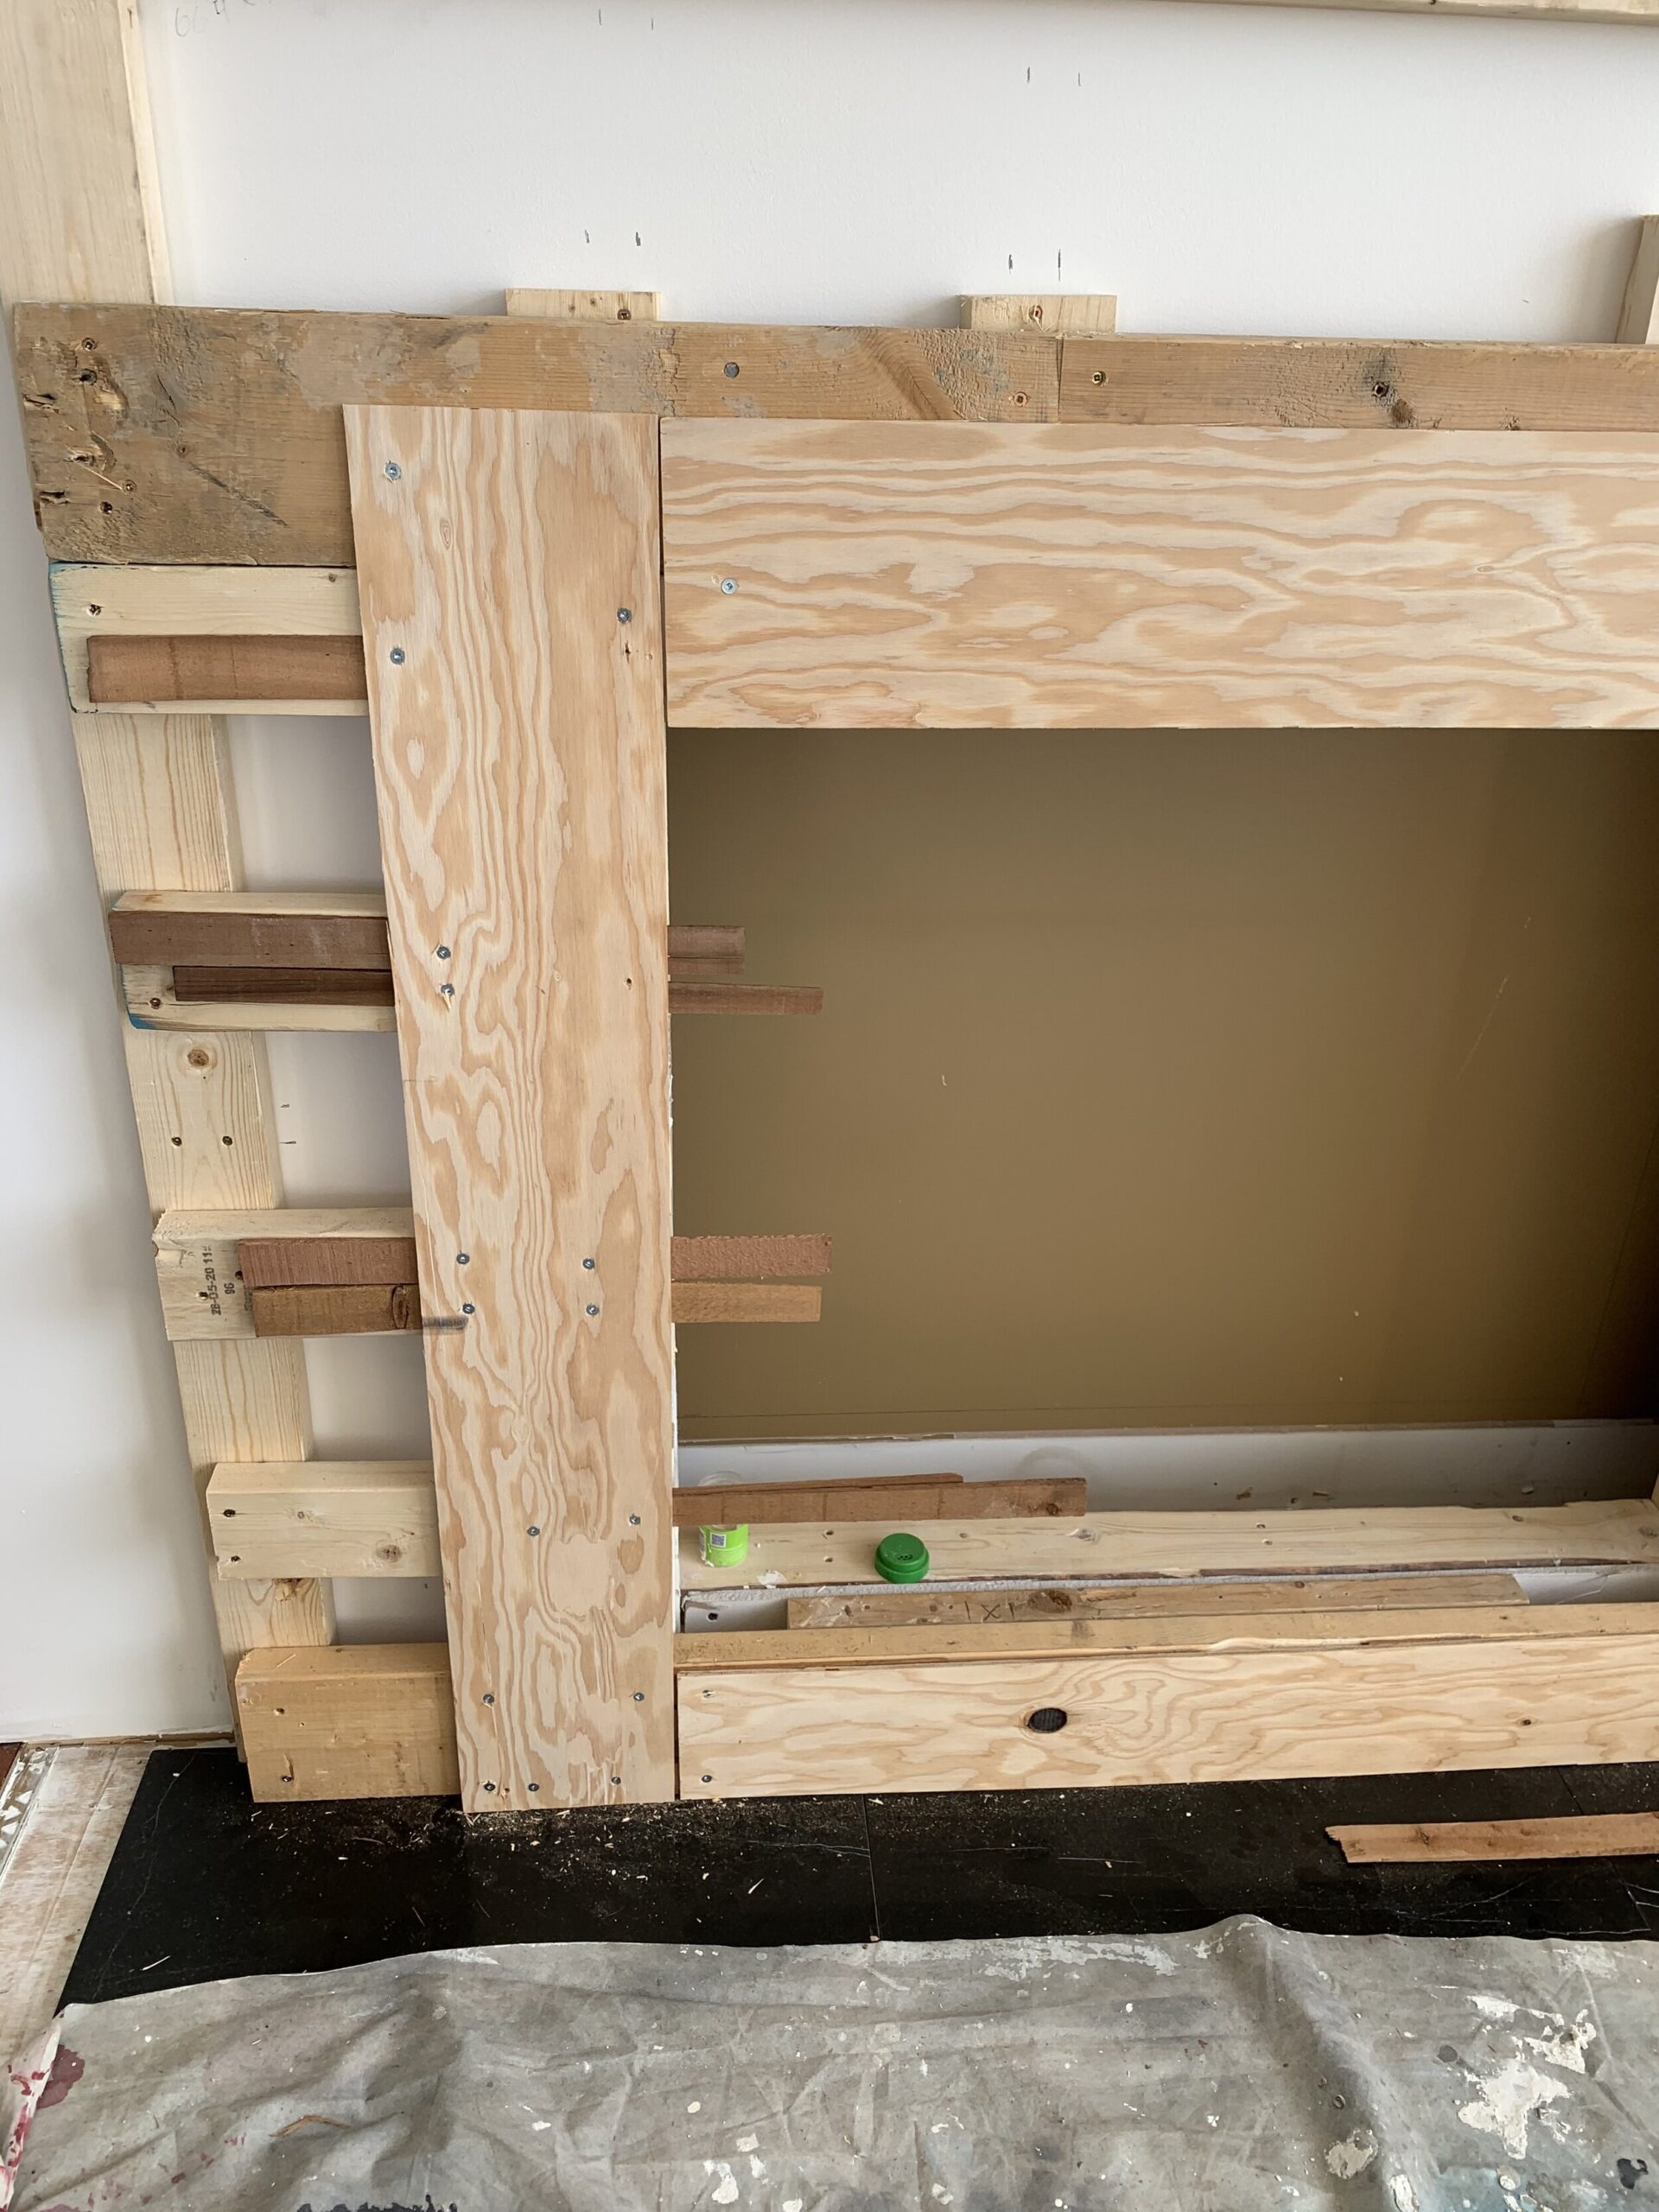 added plywood to framed opening to tile  onto